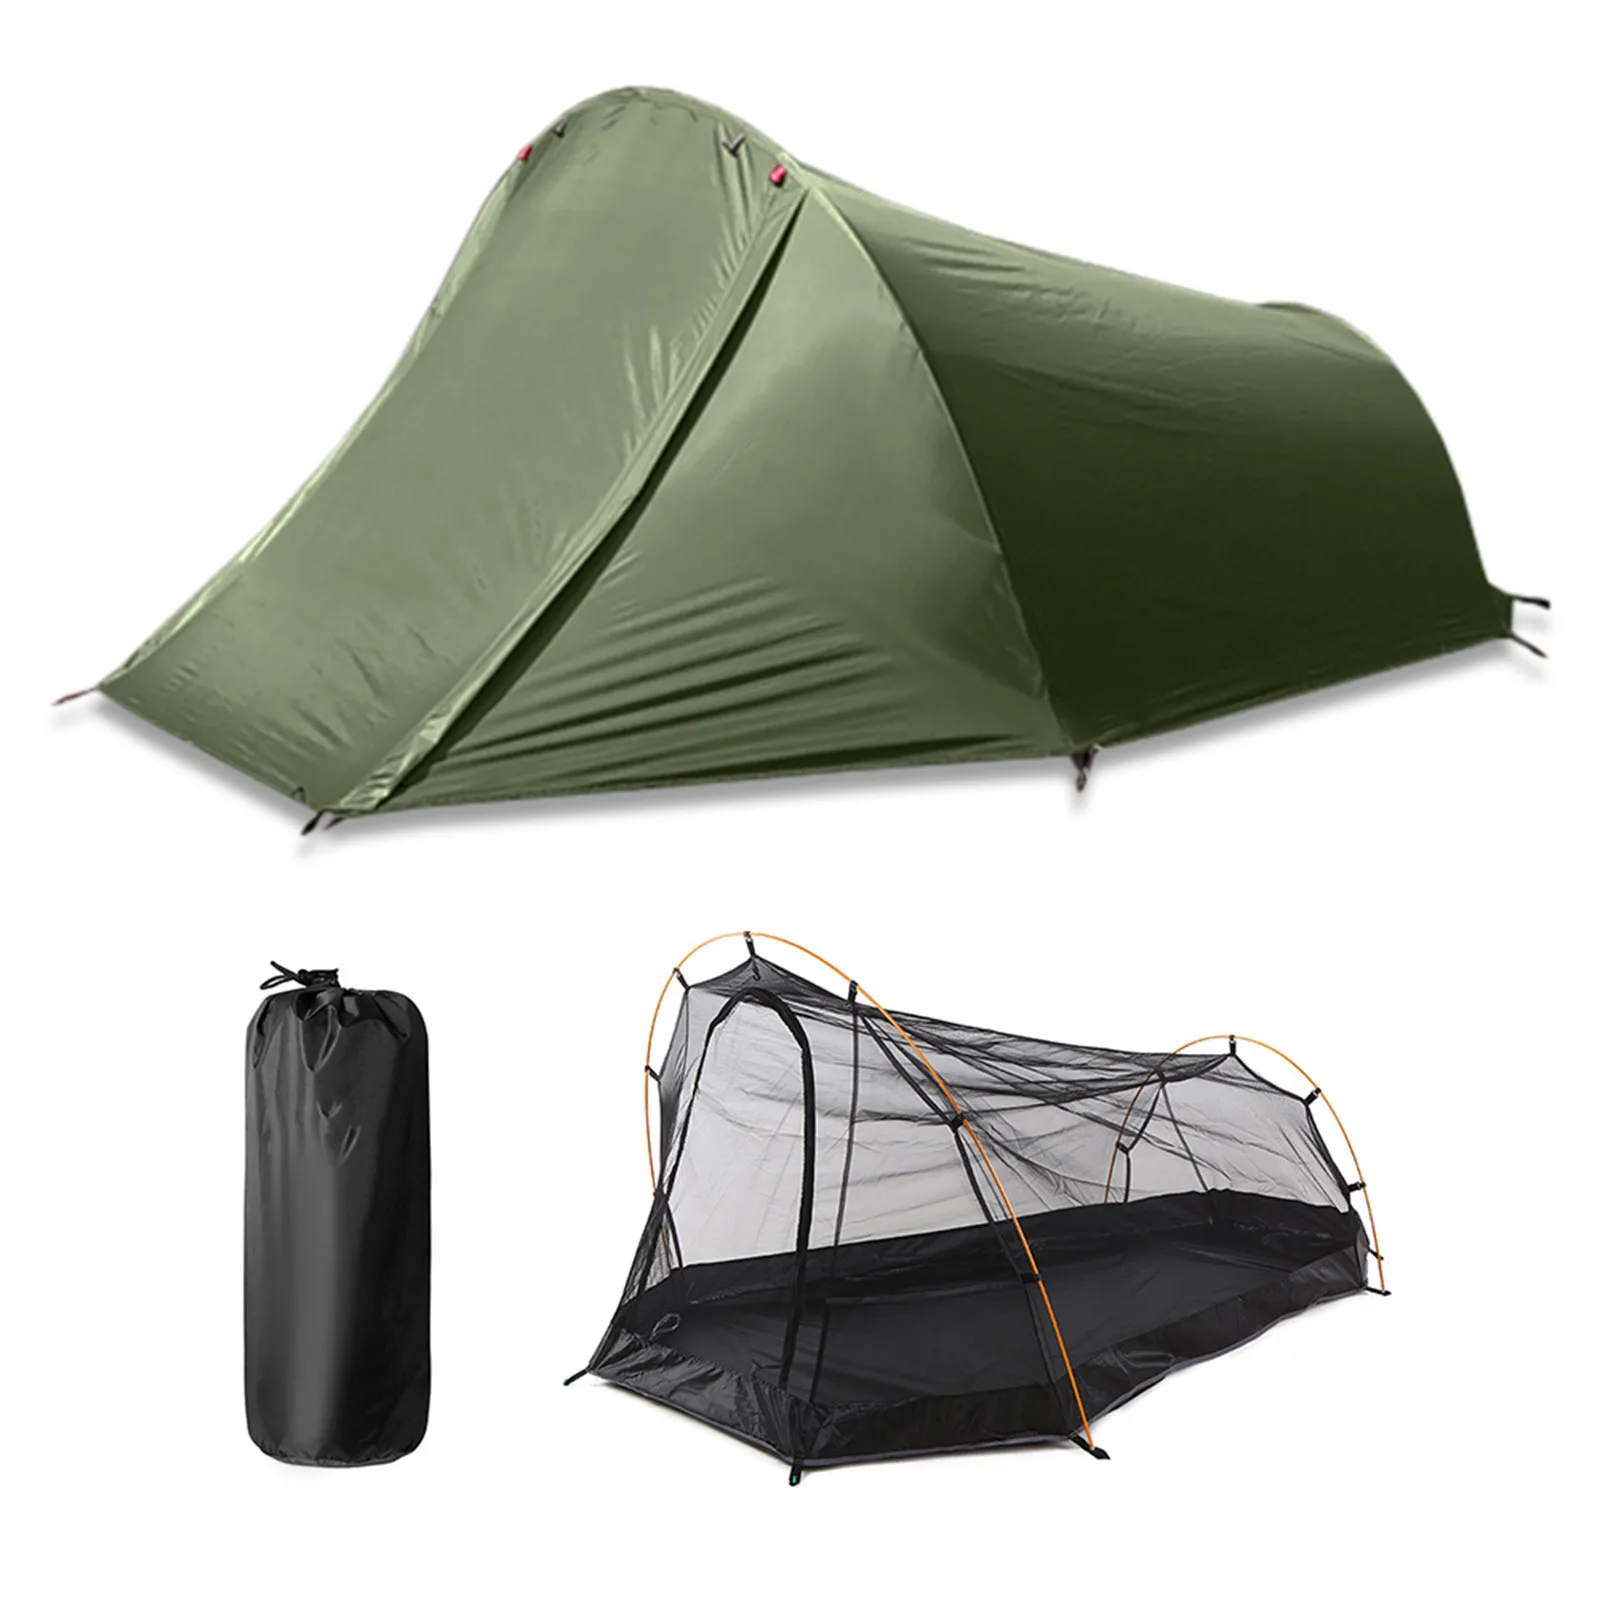 

Waterproof Camping Tent 2 Person Outdoor Tent For Biking Hiking Summer Beach For Various Outdoor Activities Such As Travel